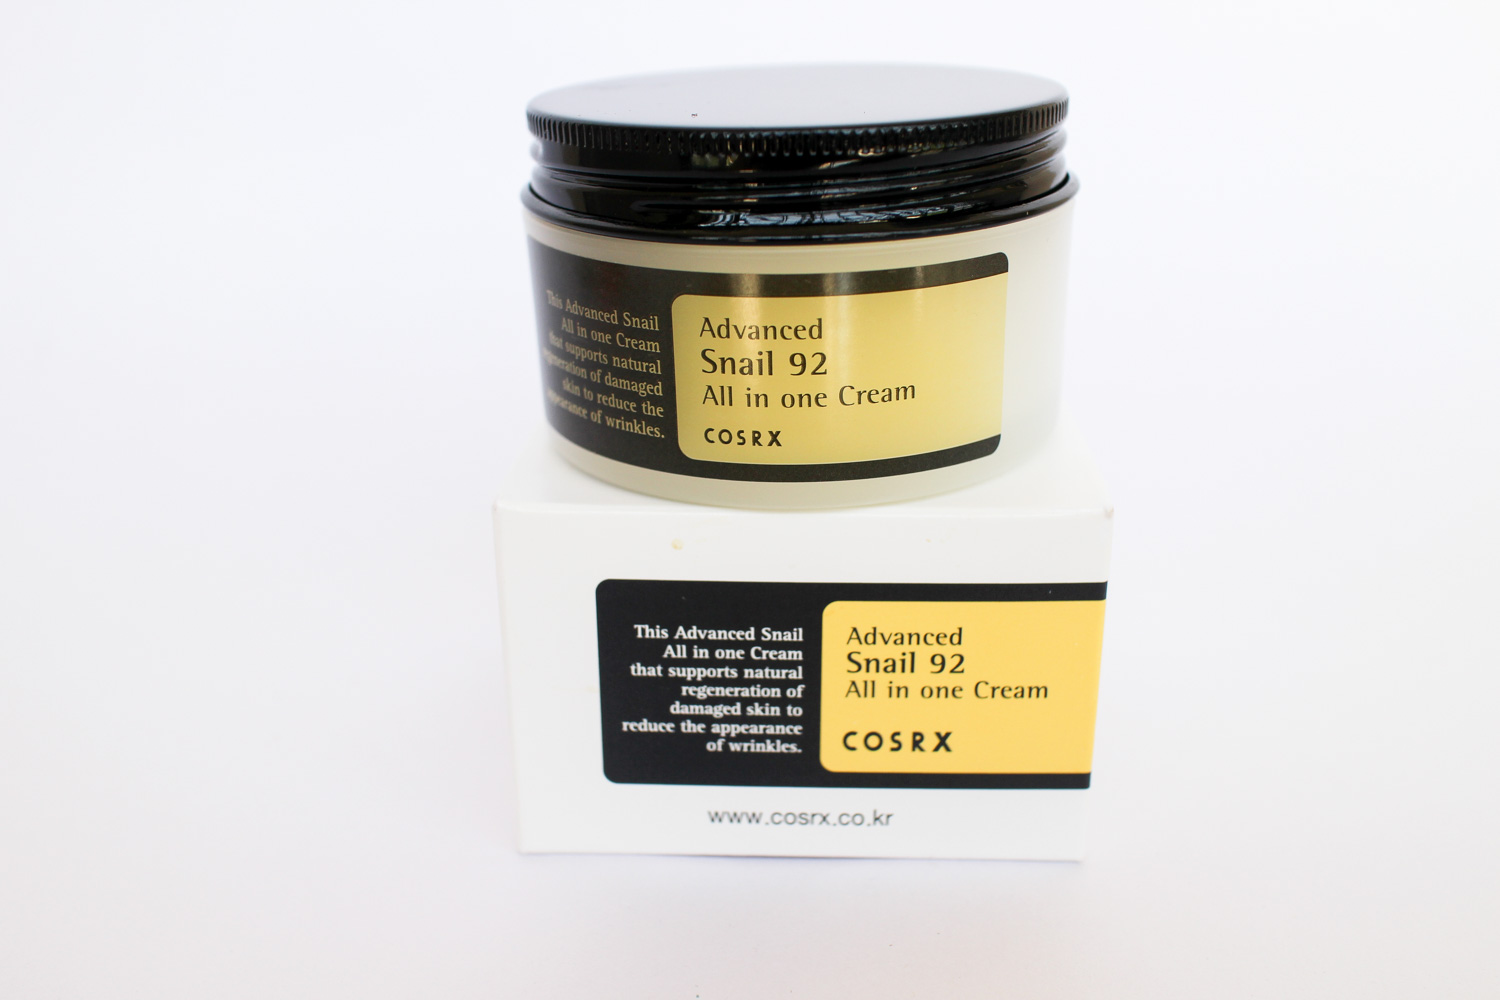 Cosrx advanced snail 92 all in one cream review